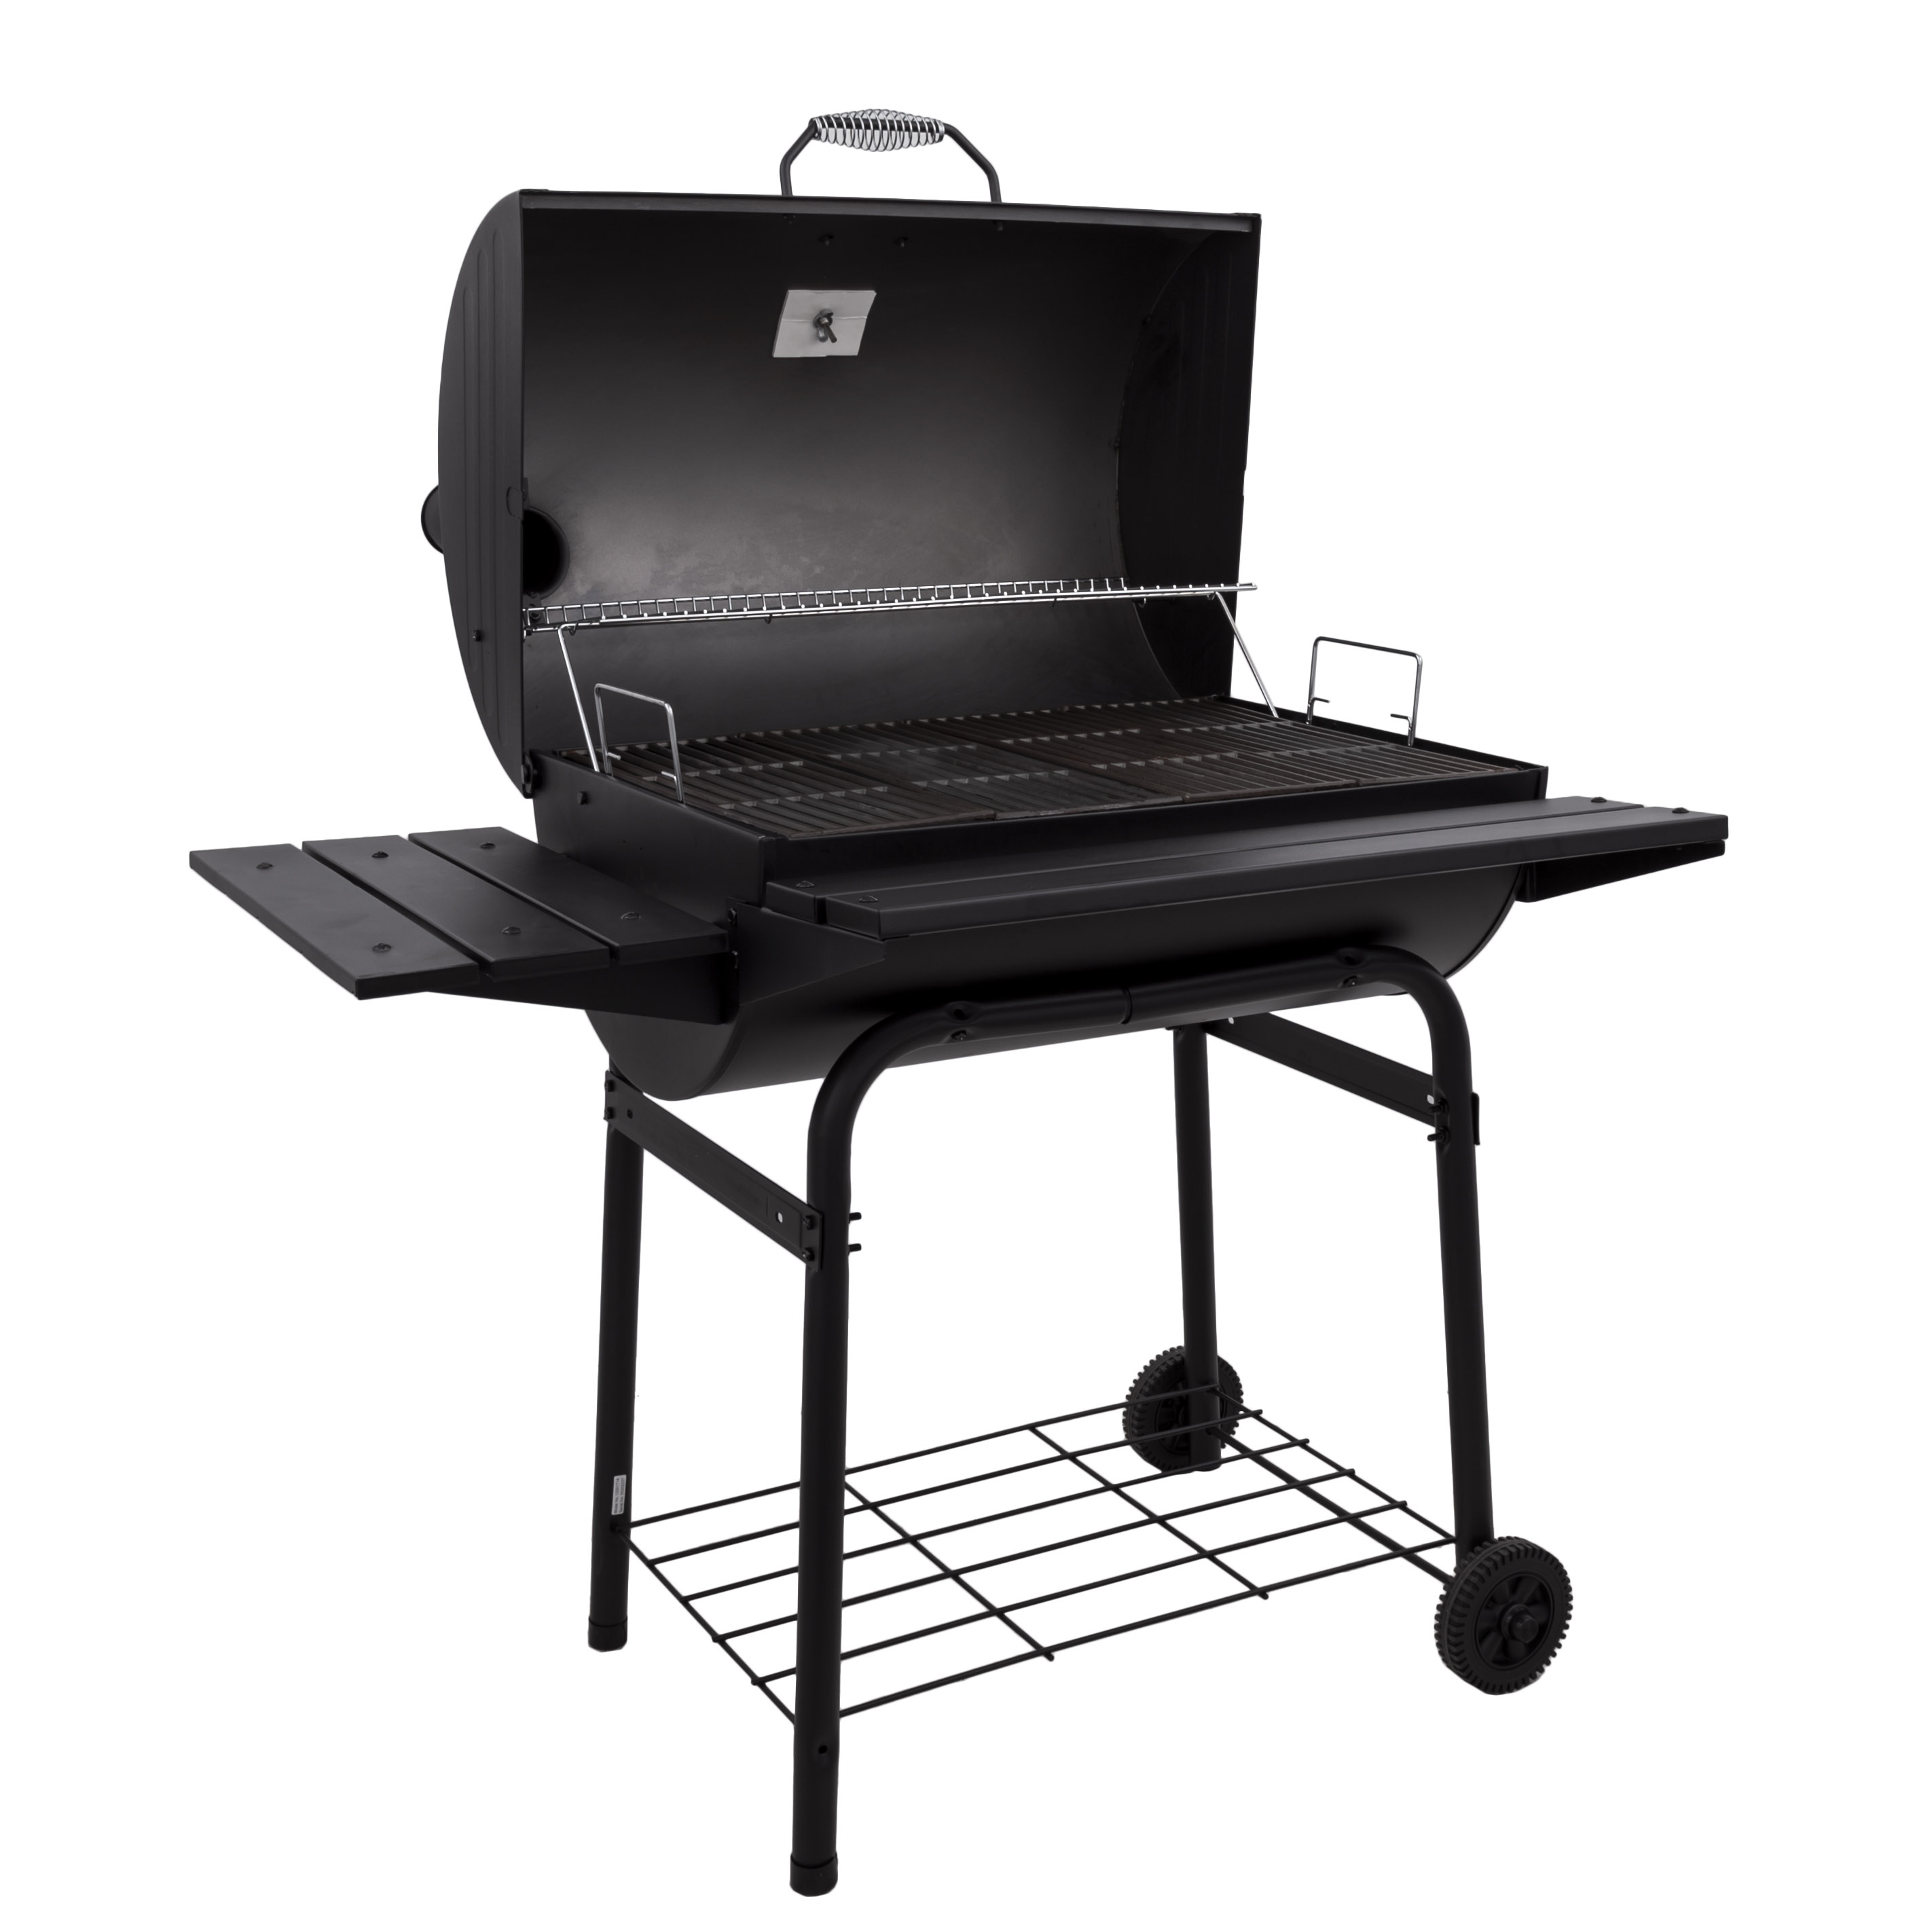 American Gourmet by Char-Broil 840 sq in Charcoal Barrel Outdoor Grill - image 5 of 9